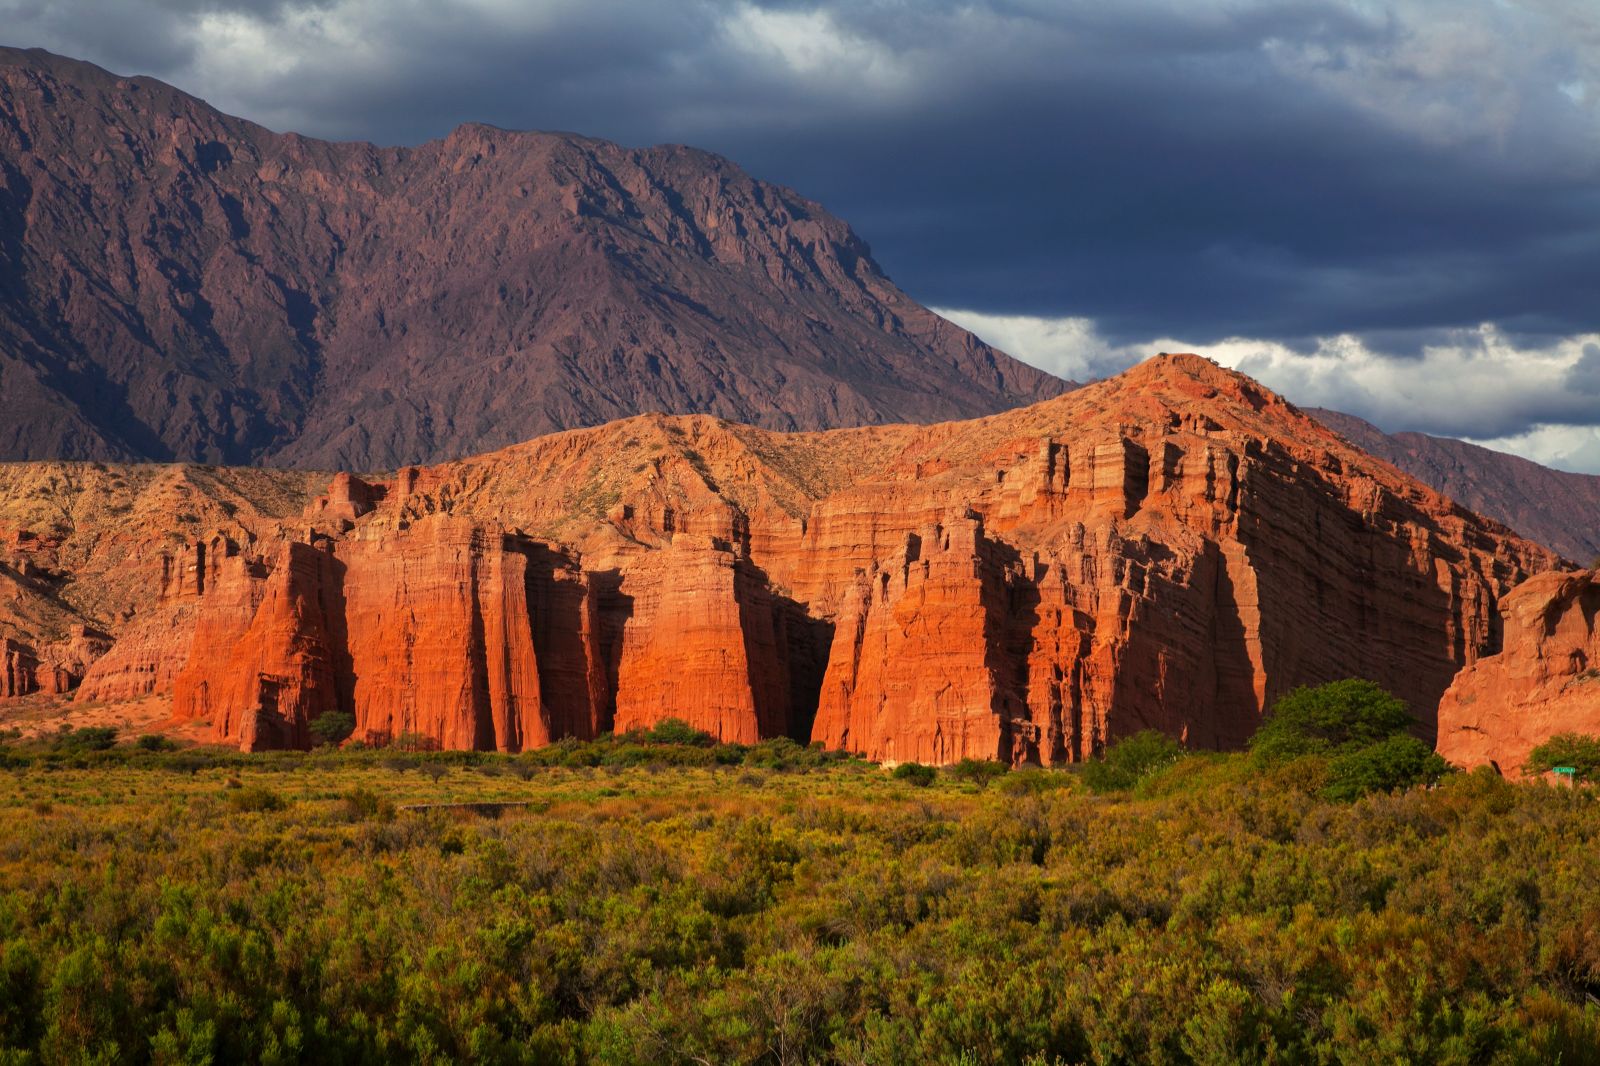 Towering brick red rock formation in Cafayate, Central Argentina